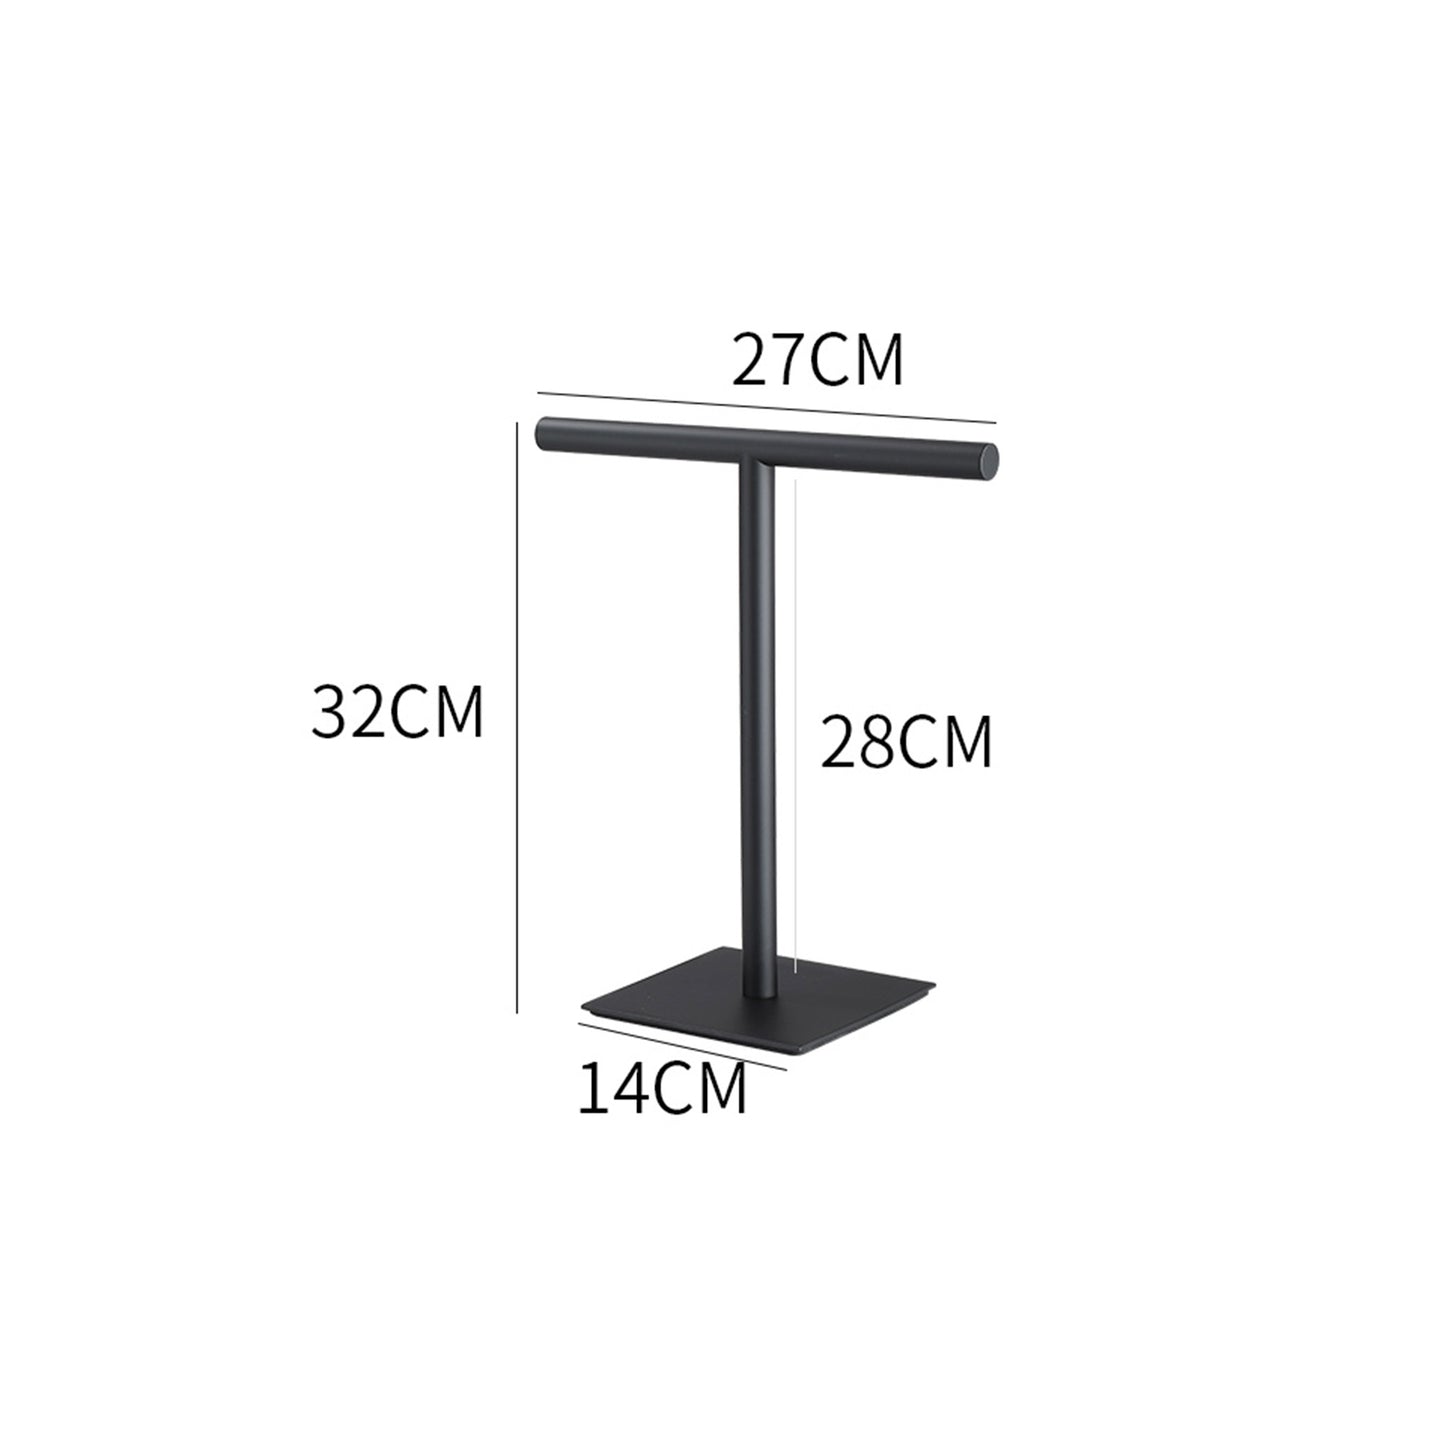 T Towel  Stand